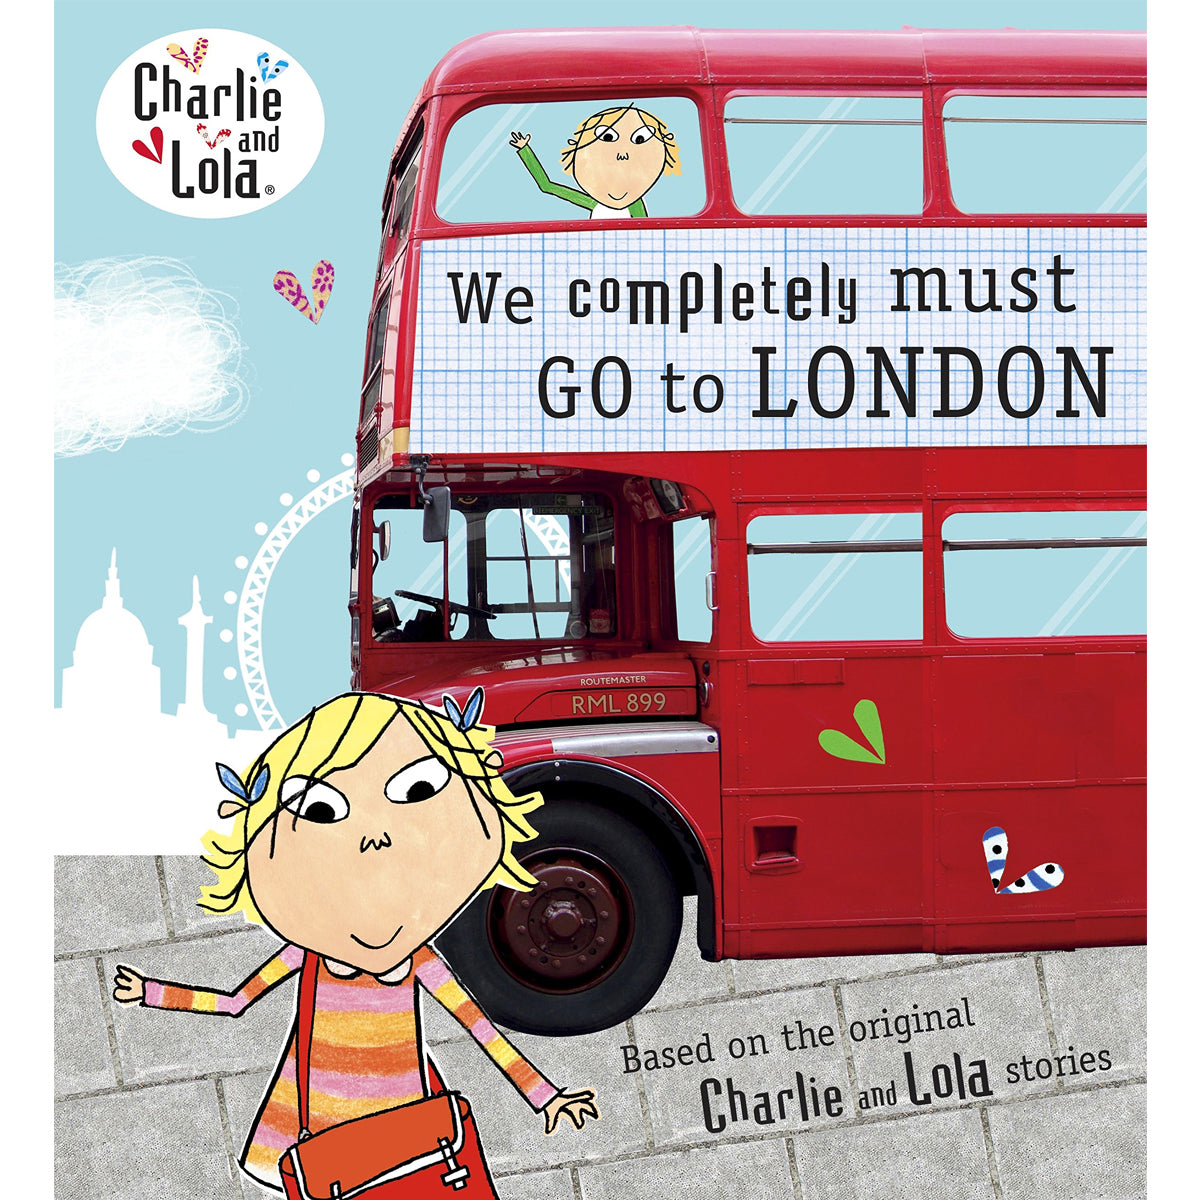 Charlie and lola we completely must got to London book cover